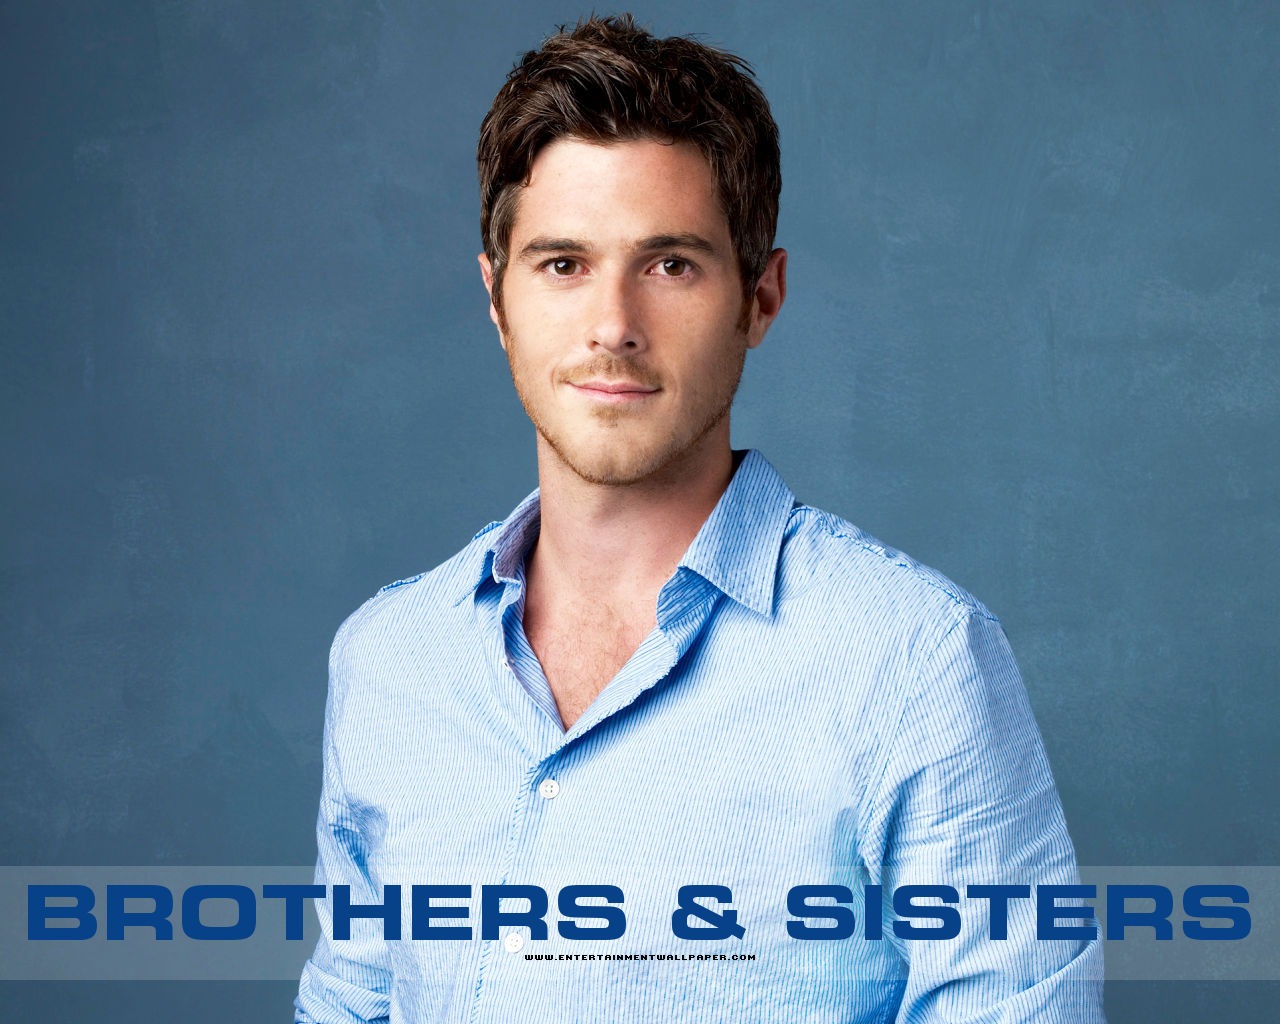 Brothers & Sisters 兄弟姐妹16 - 1280x1024